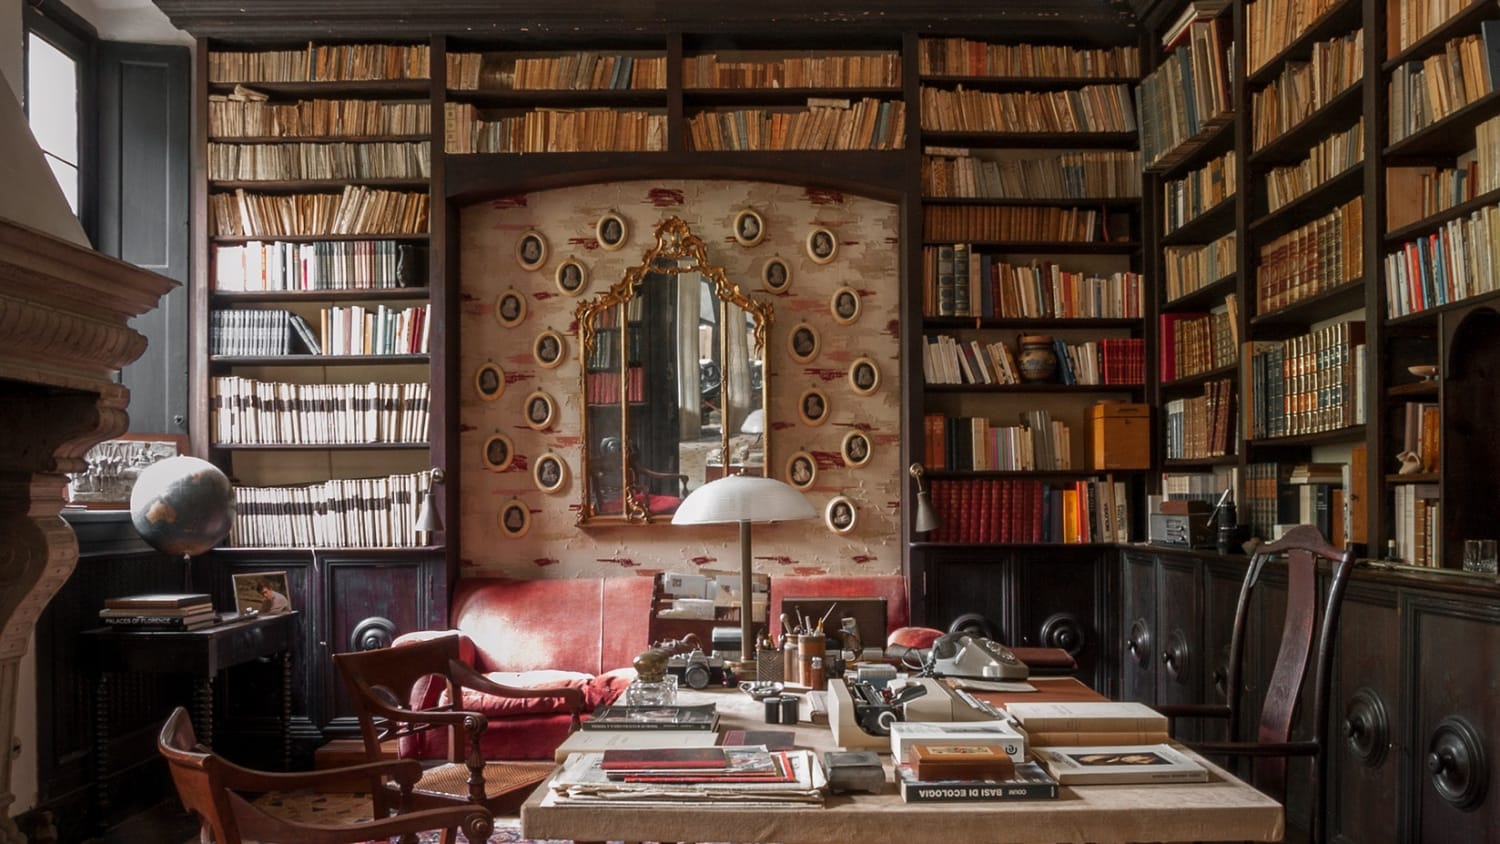 The House & Garden team's favourite fictional rooms from film and TV